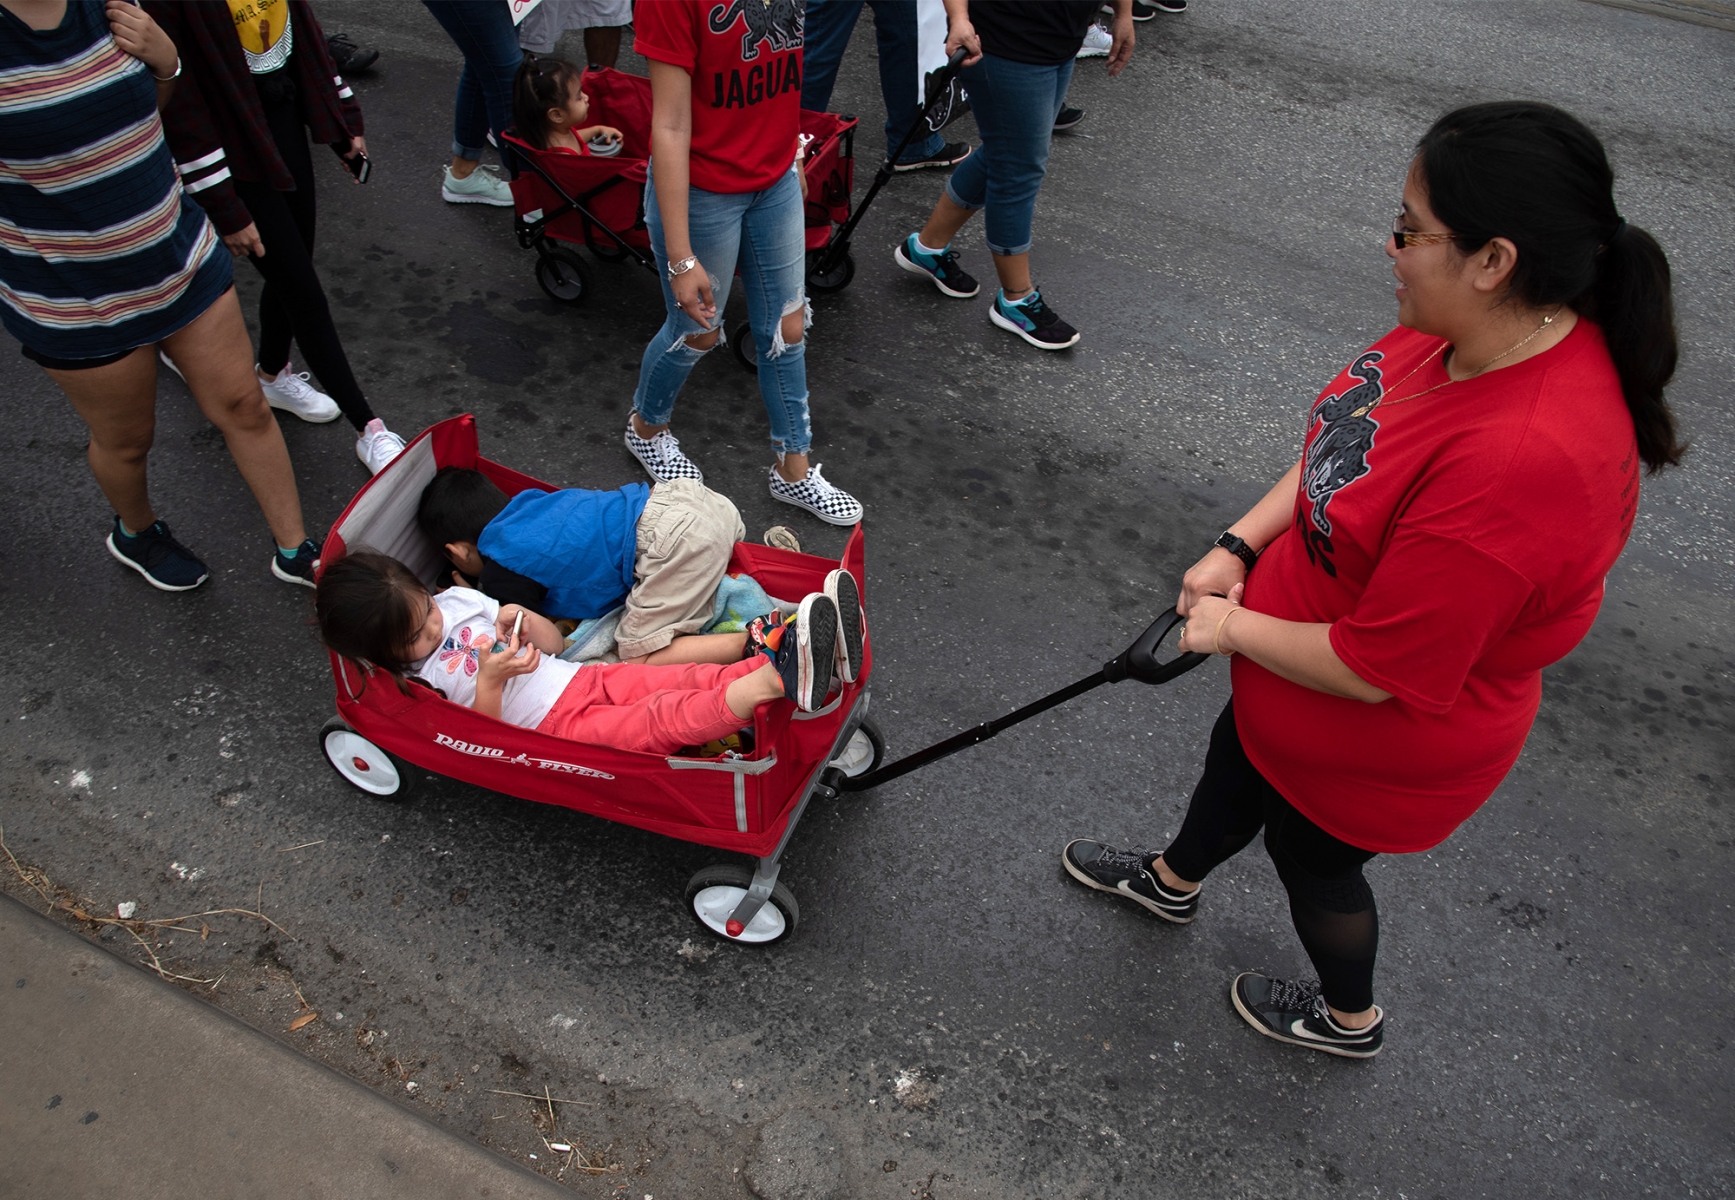 Amanda Denman pulls her kids Destiny, 4, and Damien, 3, in a Radio Flyer during San Antonio’s 23rd annual César E. Chávez March for Justice on Saturday, March 30, on Guadalupe Street. Photo by V. Finster | Heron